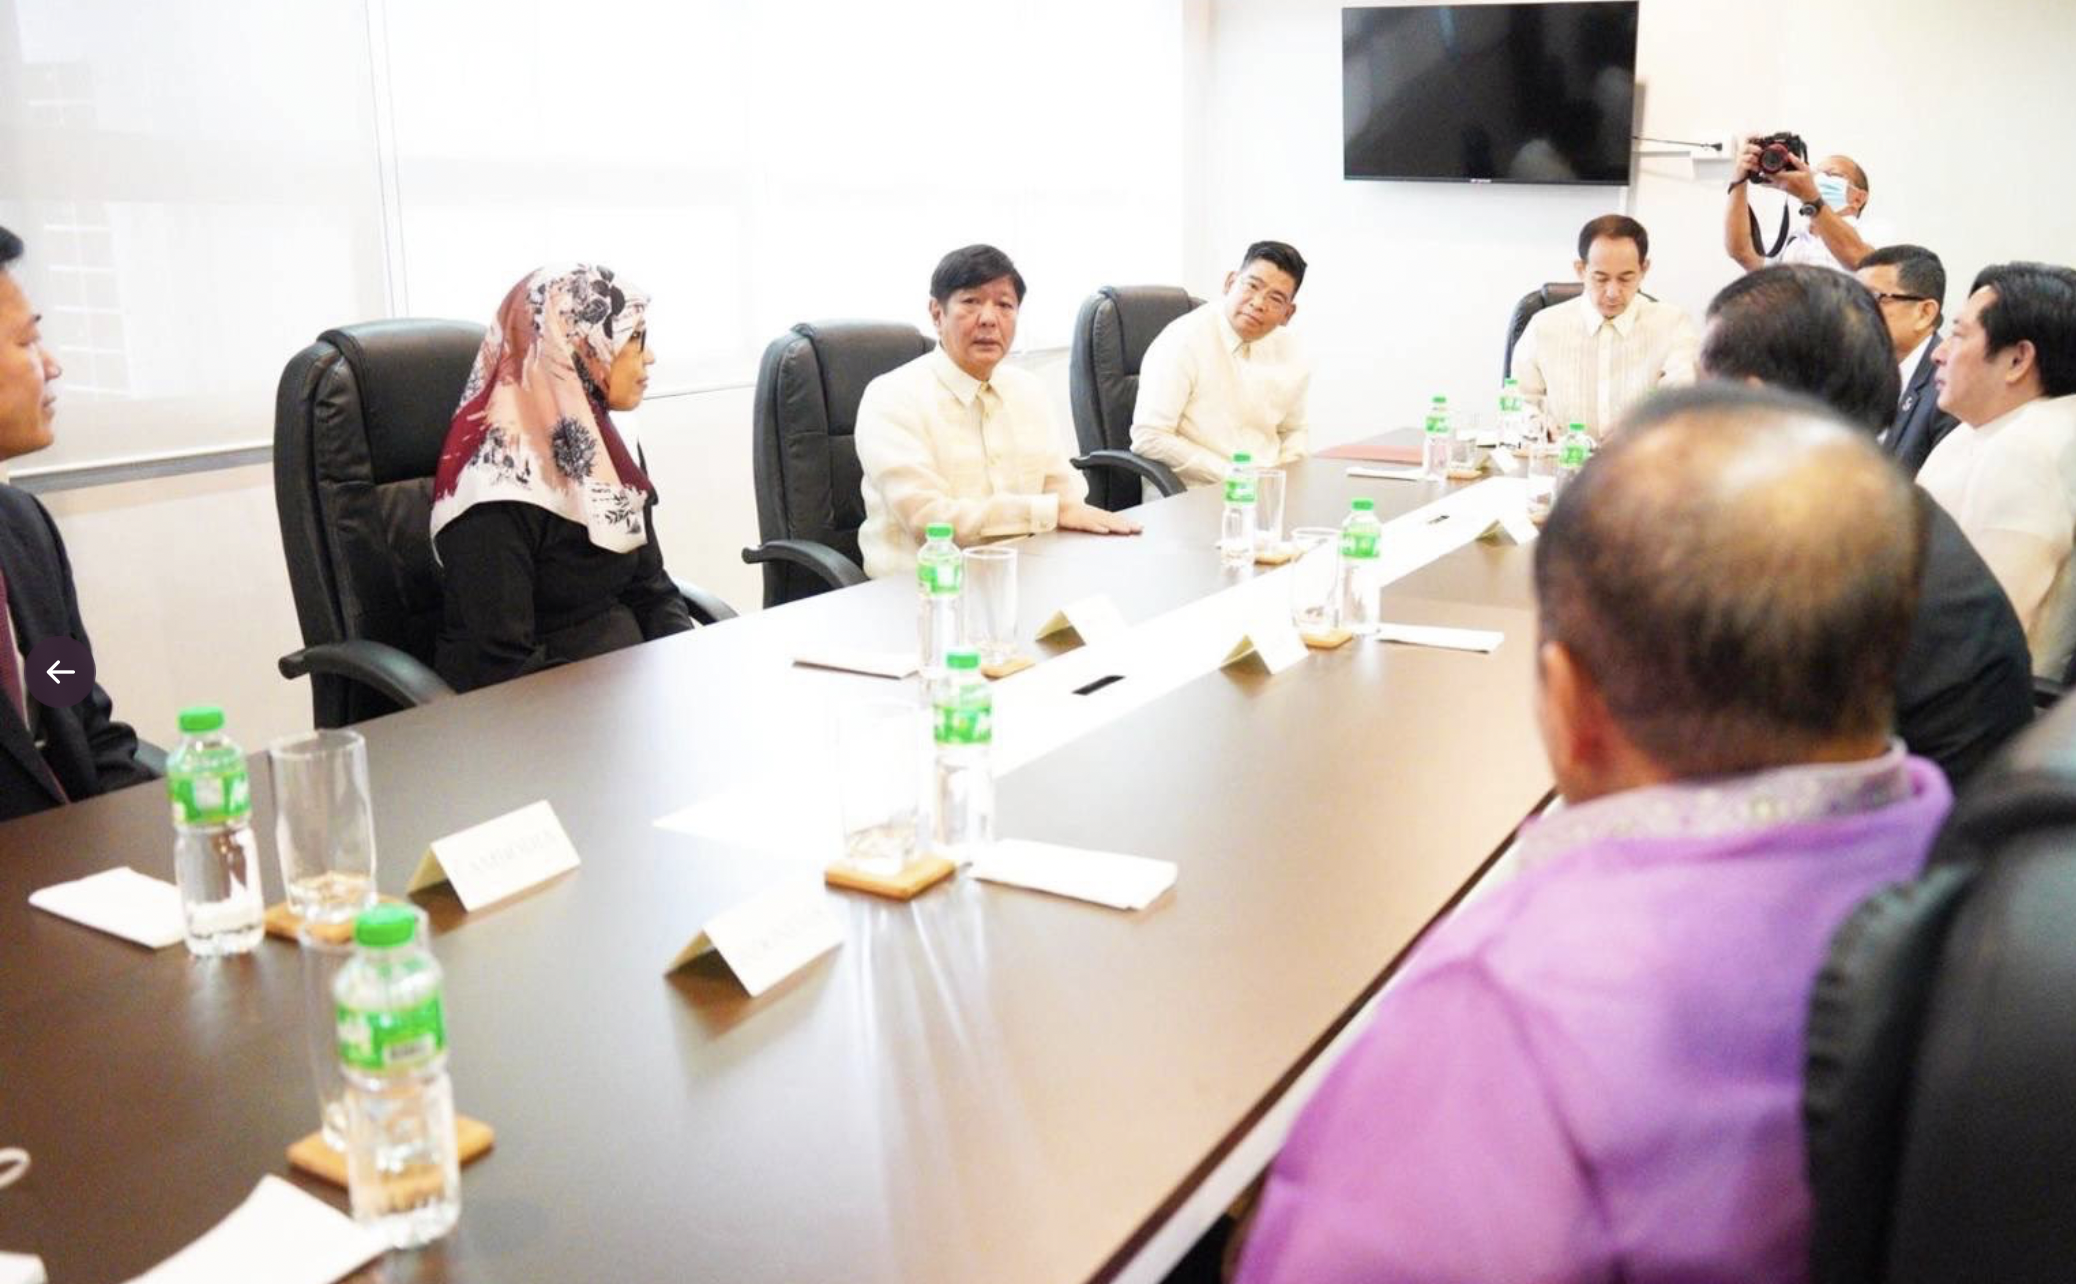 Ambassadors from the Association of Southeast Asian Nations (Asean) paid a courtesy call Monday on President-elect Ferdinand “Bongbong” Marcos Jr. in Mandaluyong City.